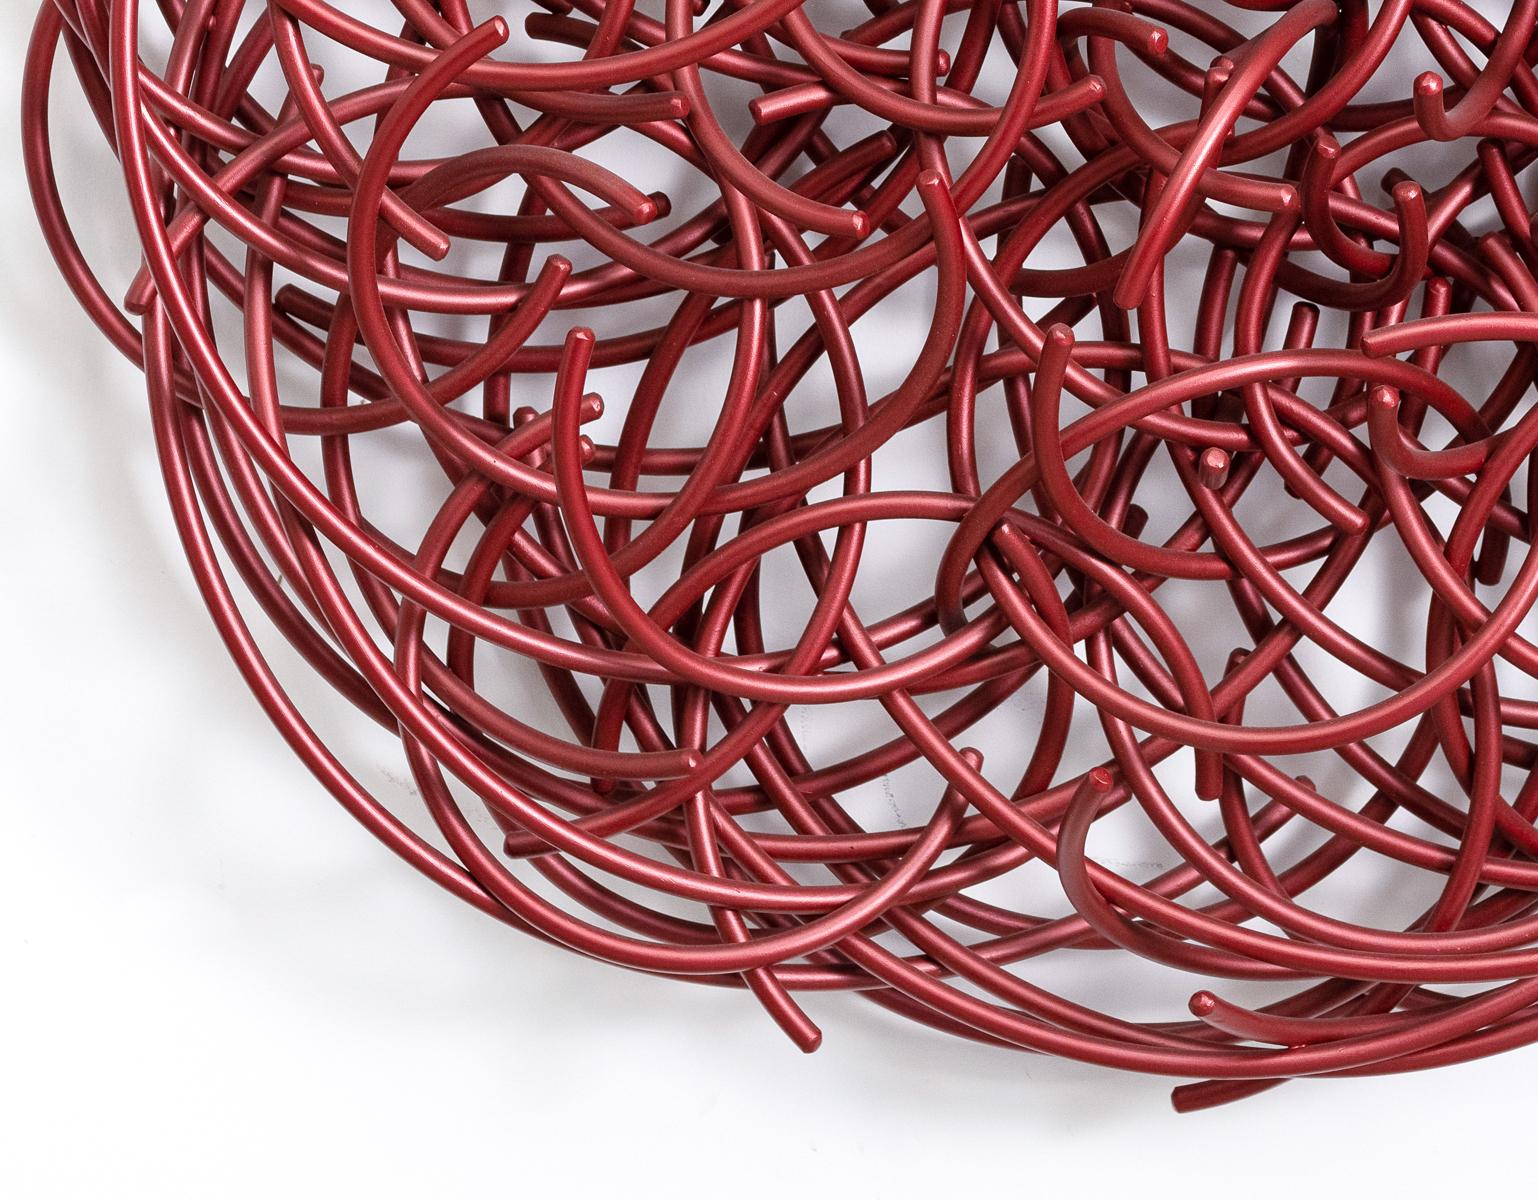 Shayne Dark’s new Maelstrom sculptures have powerful and palpable energy like the natural whirlpools this series is named after. No. 1 is an intricate tangle of round aluminum rods coated in a rich, shiny burgundy red in a circular wreath-like form.